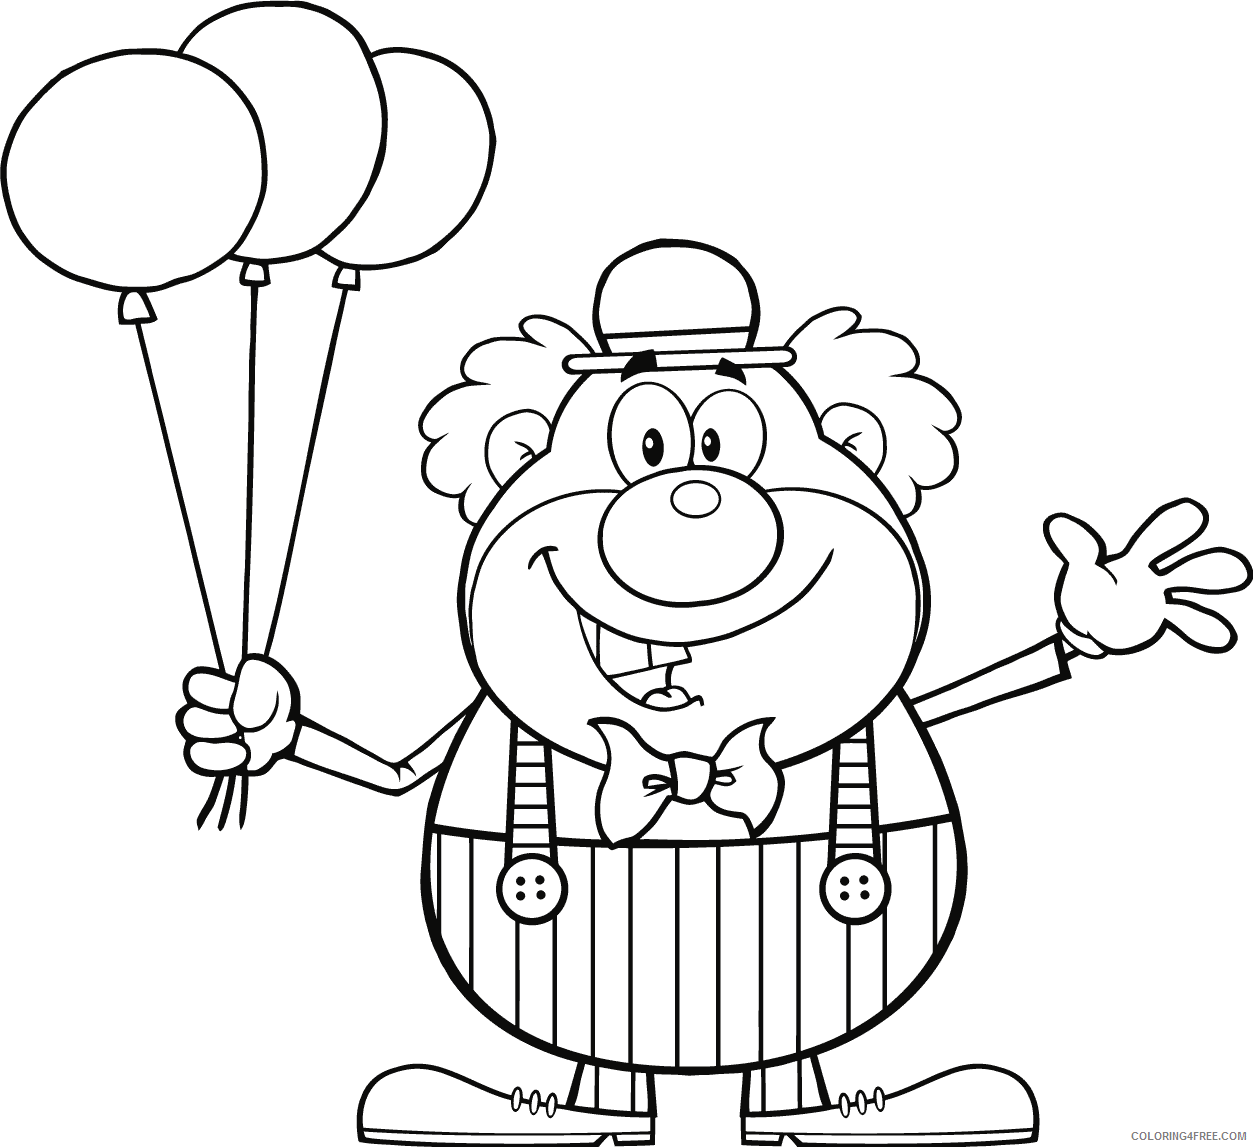 Clown Coloring Pages Clown Balloon Printable 2021 1765 Coloring4free